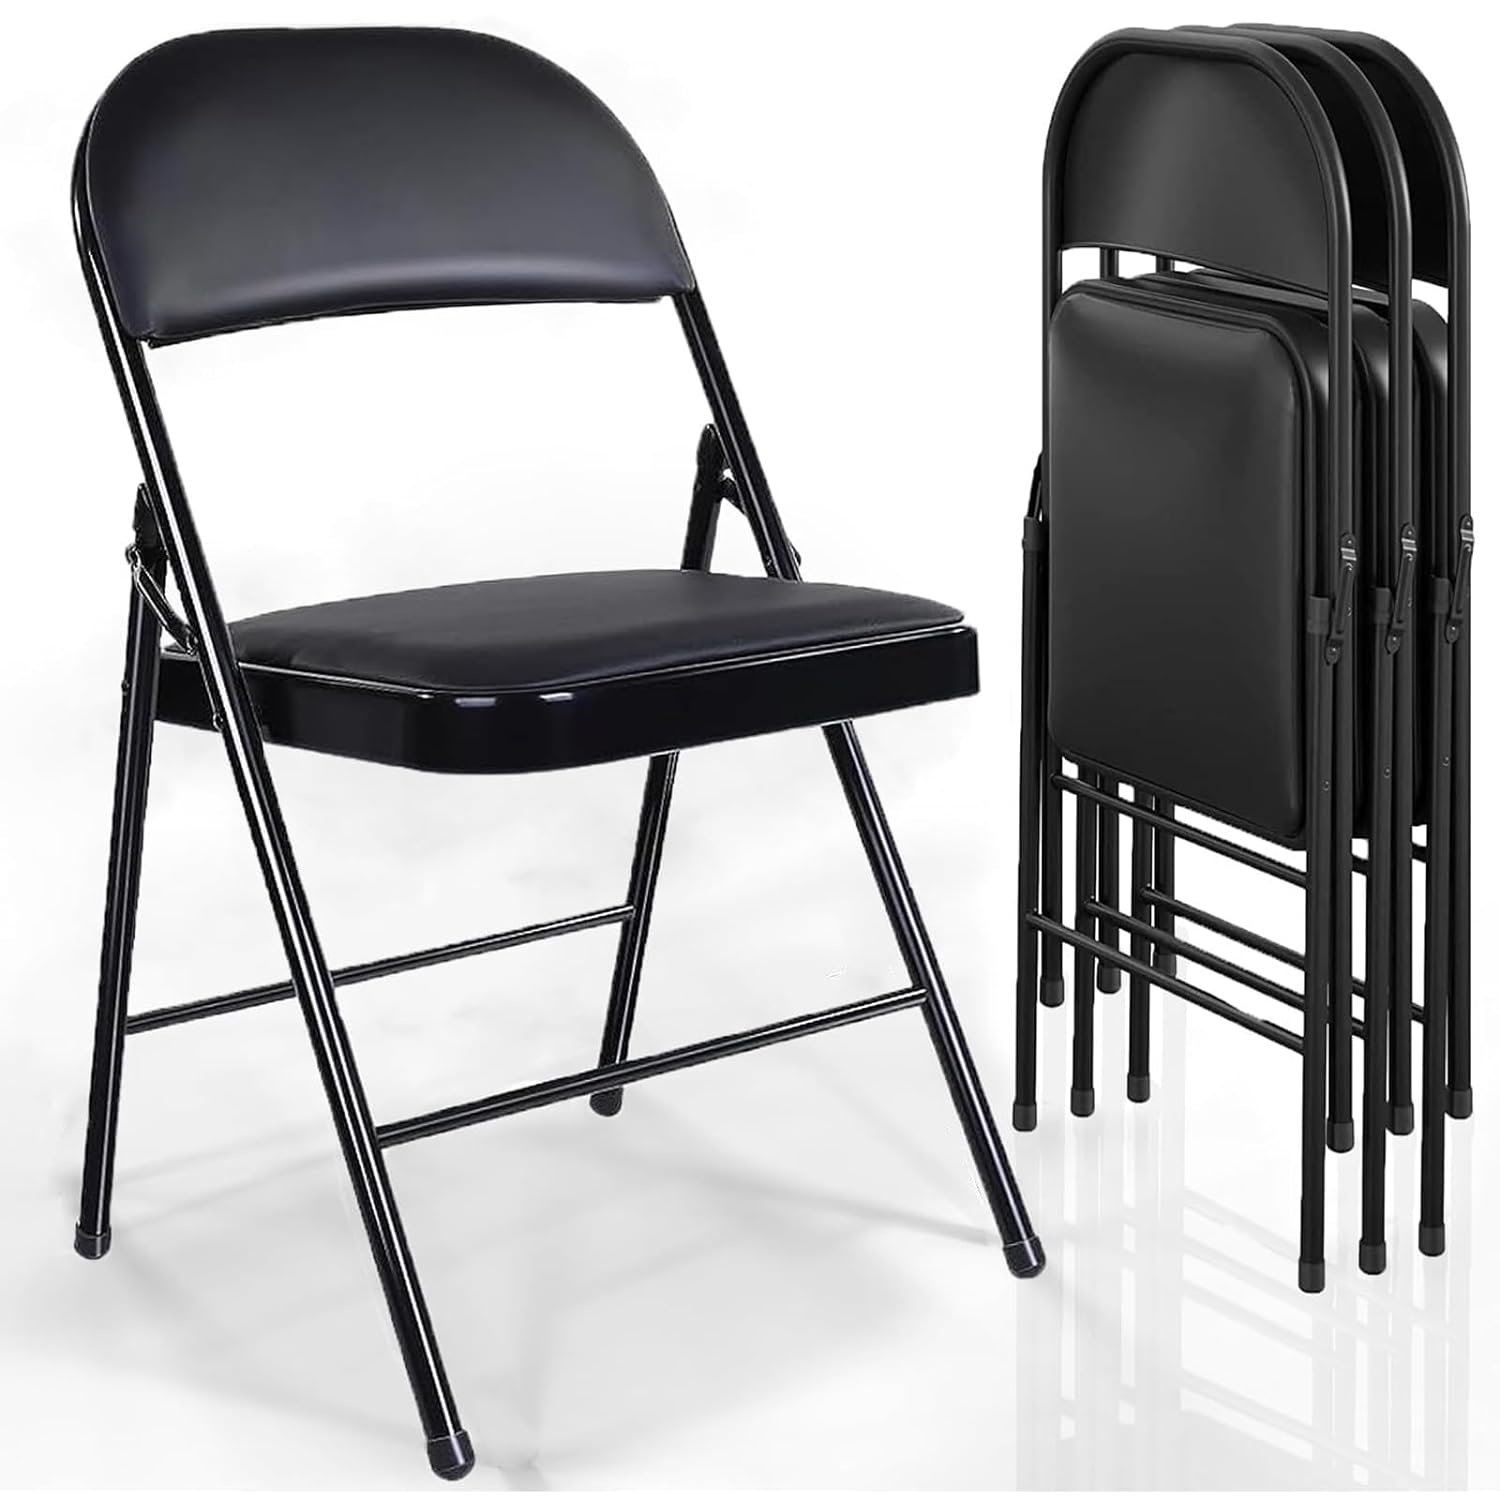 GIVIMO Folding Chair Review